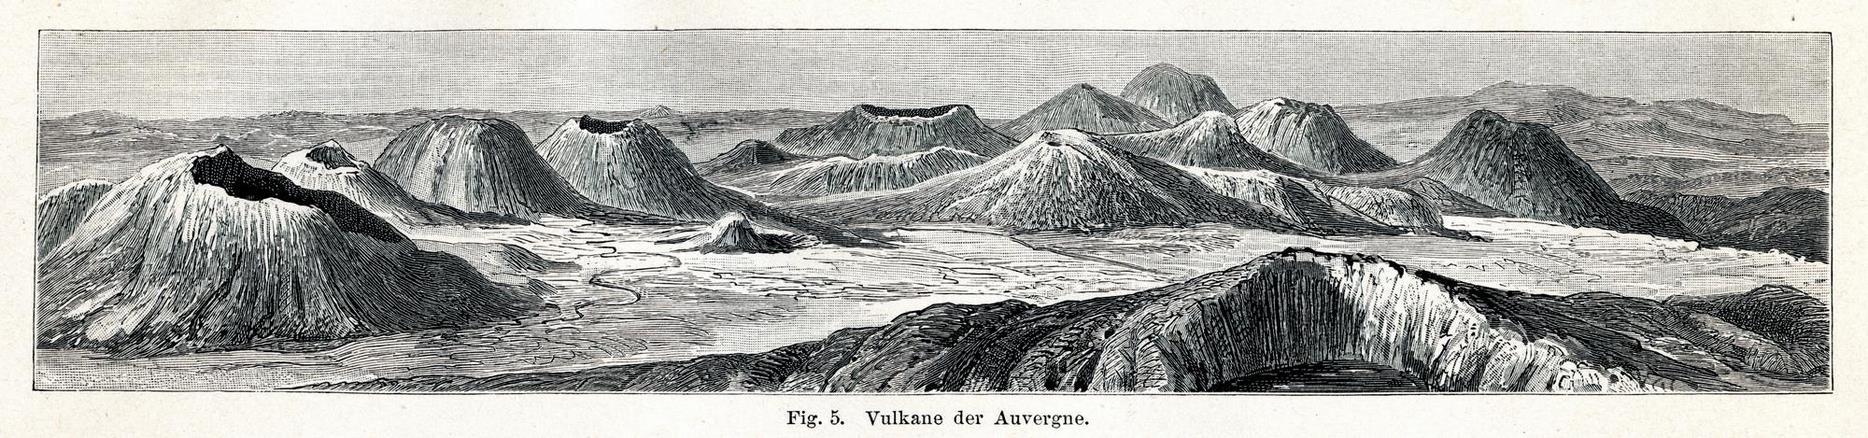 The Volcanoes of Auvergne - drawings of a panorama